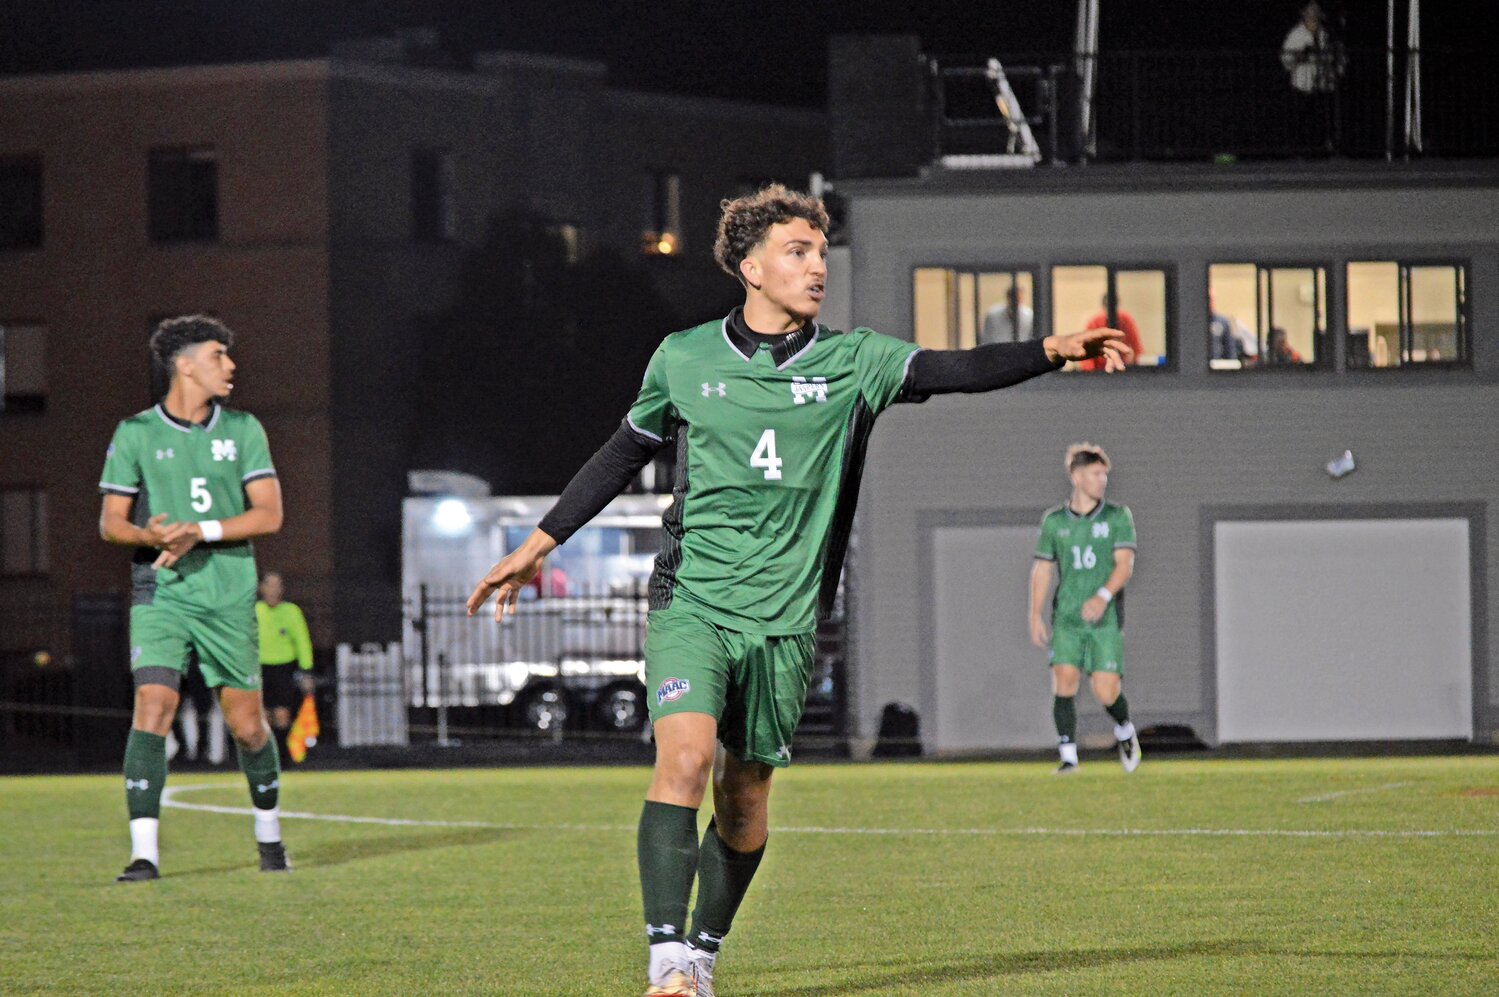 The Manhattan College men’s soccer has been in top form once the schedule shifted to Metro Atlantic Athletic Conference play. The Jaspers rattled off five consecutive wins to open league play before suffering a 1-0 setback on Saturday at Niagara University.